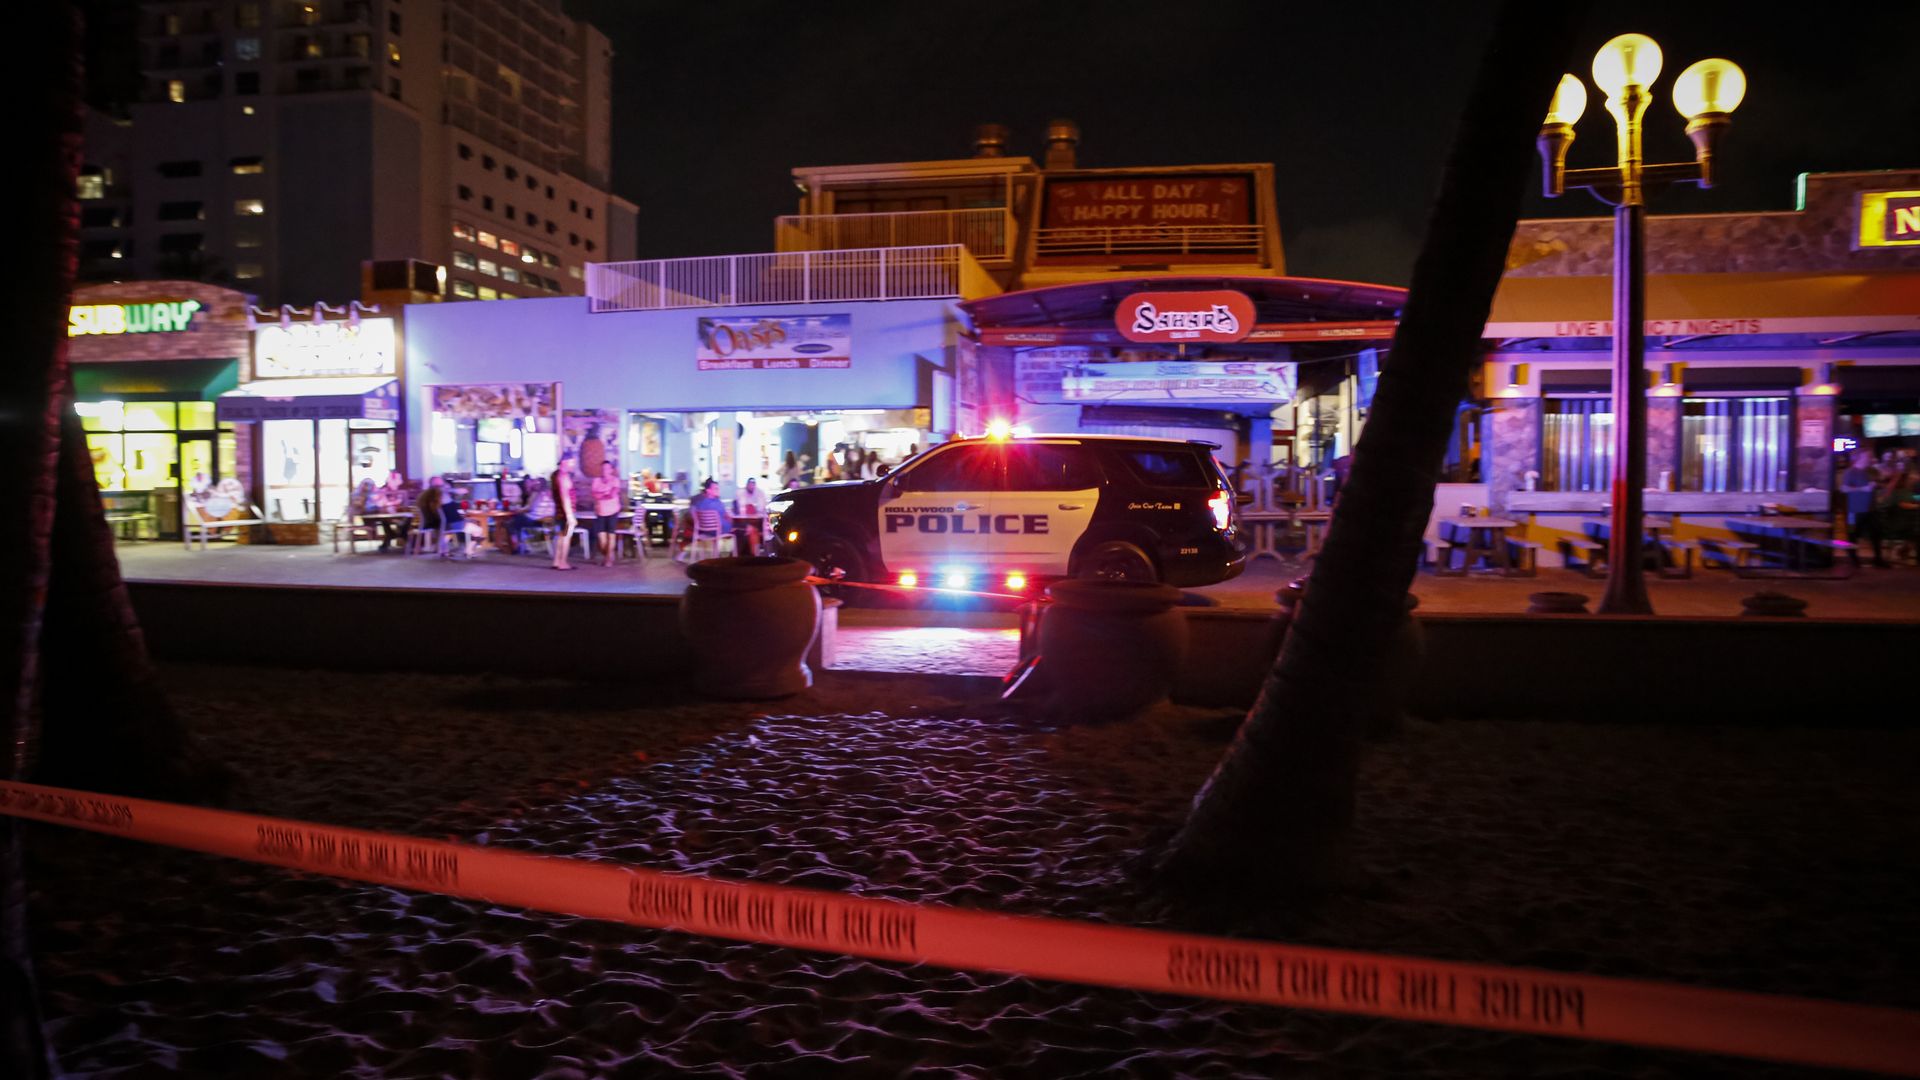 Hollywood Police cordon off the scene after an altercation ended in gunfire at Hollywood Beach Broadwalk in Hollywood, Florida, United States on May 29.